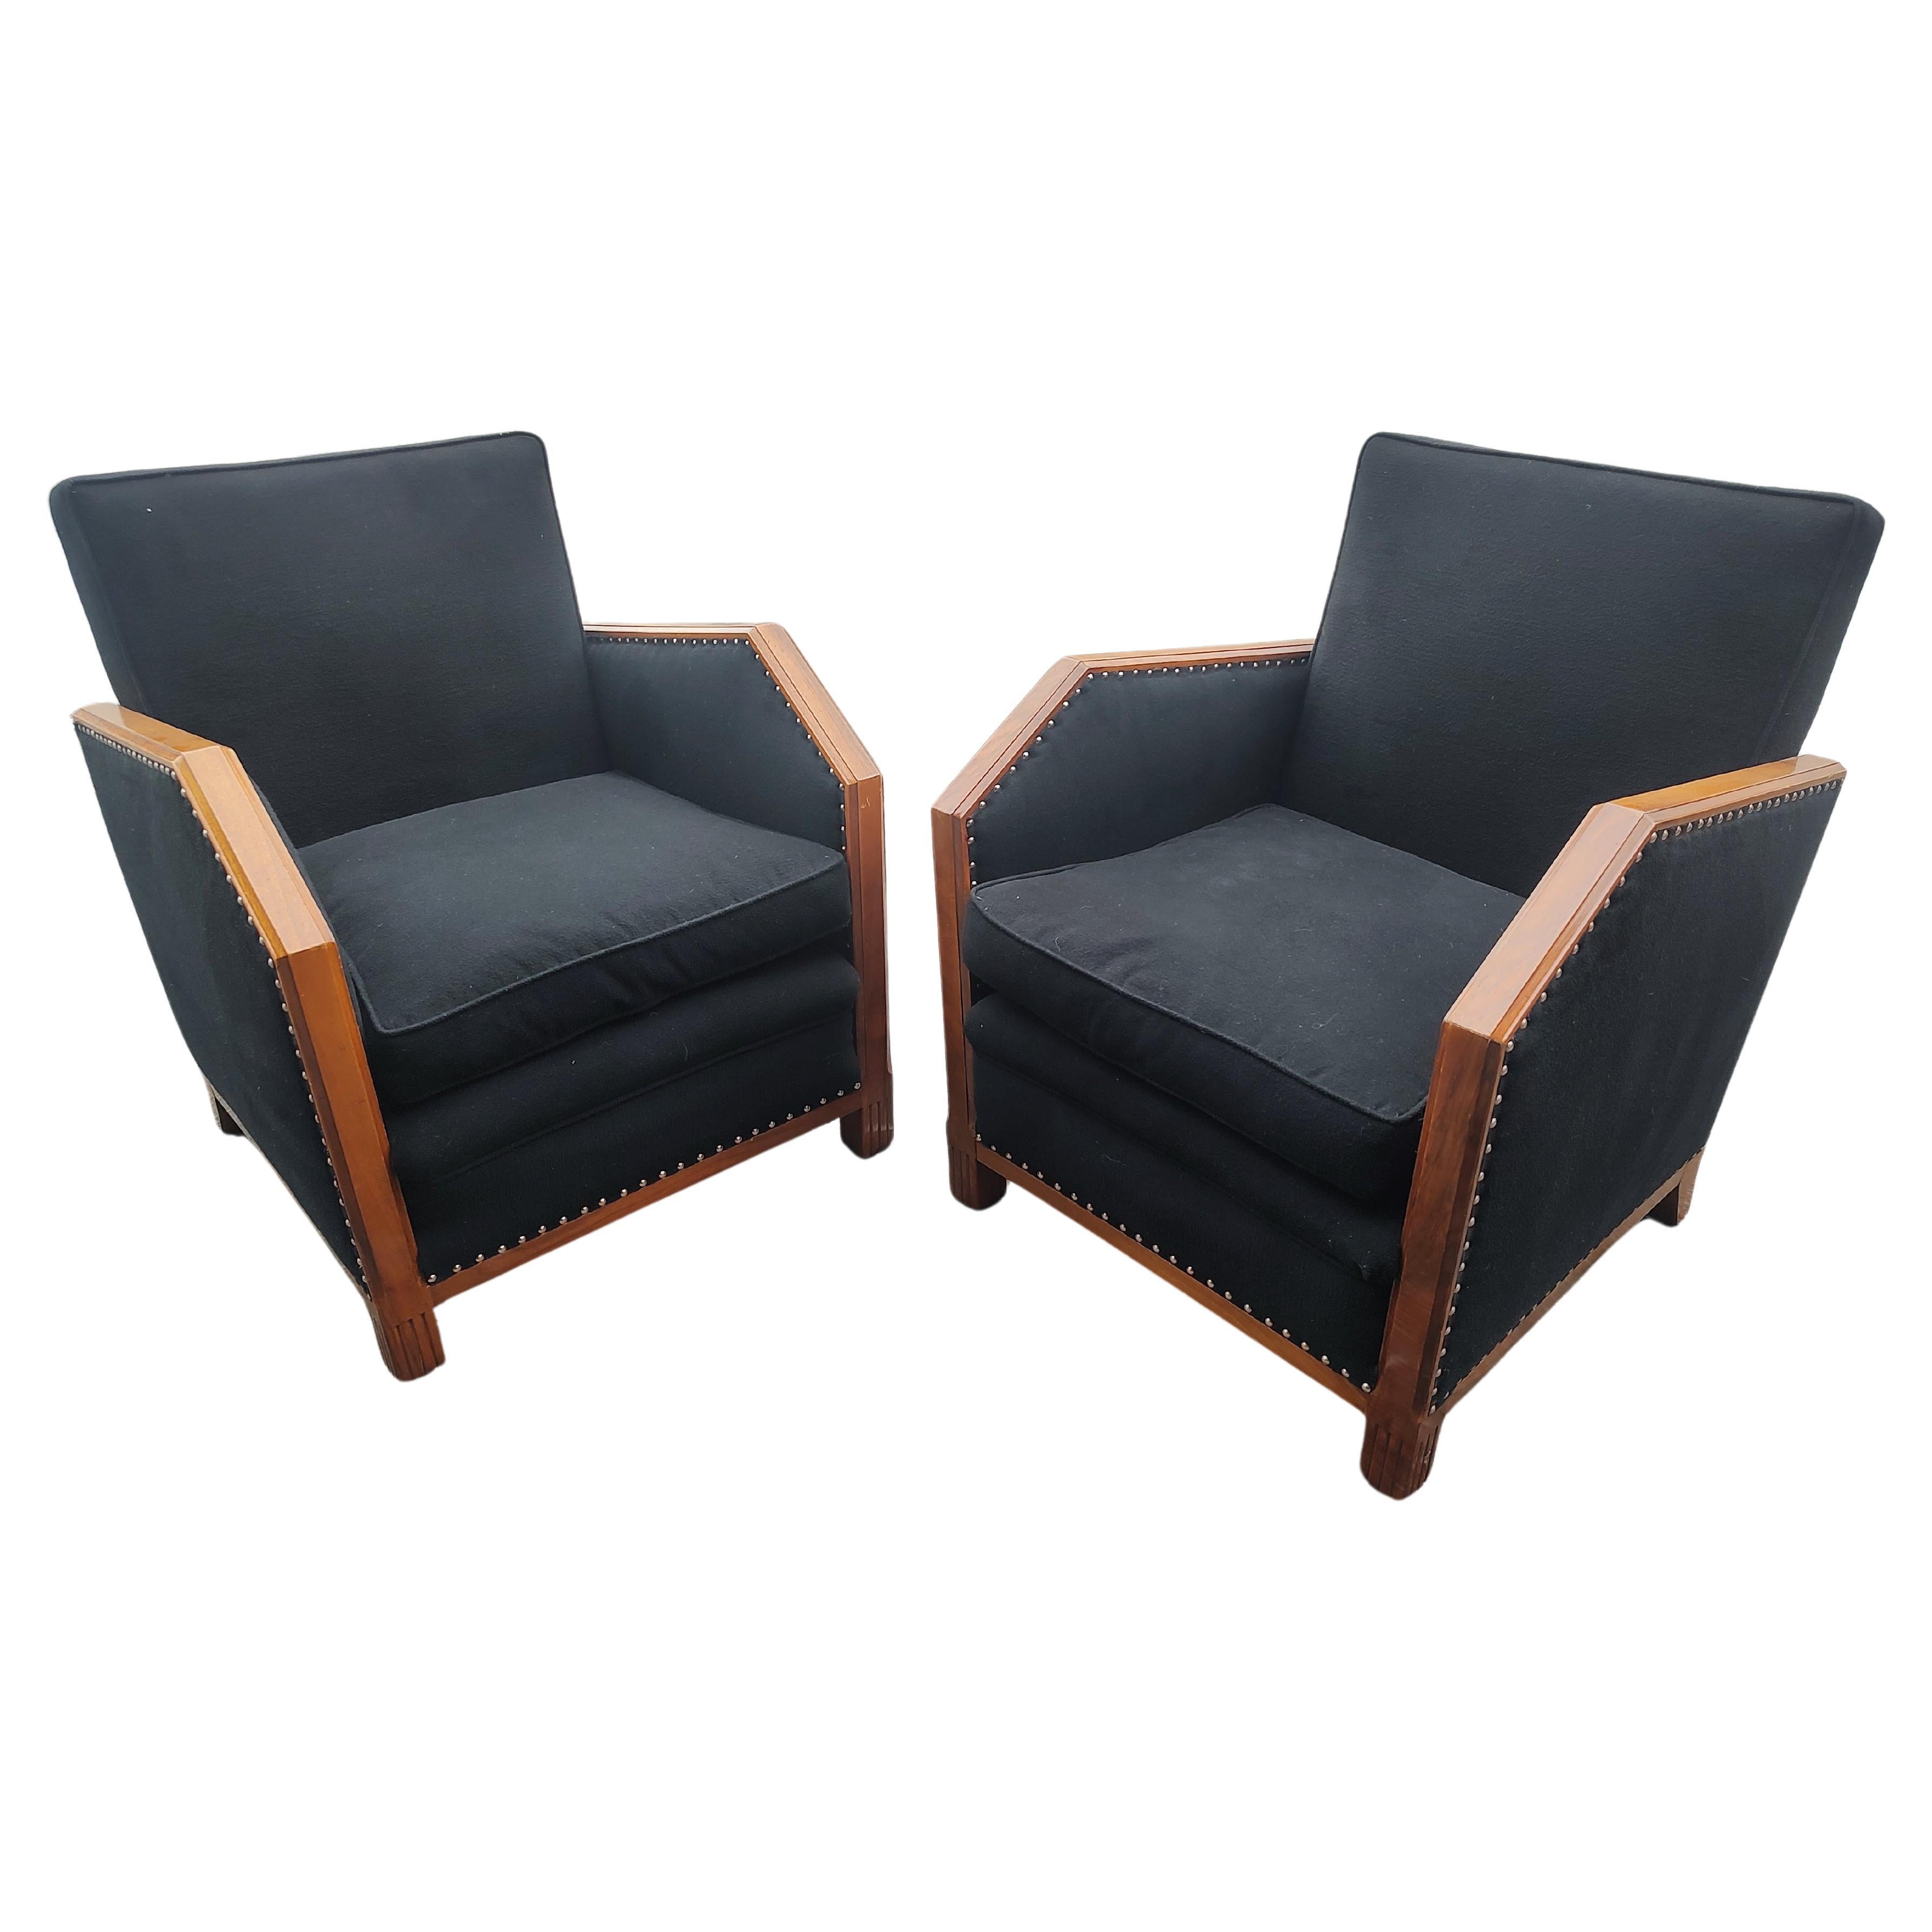 Pair of Rosewood Art Deco Club Chairs with Felt Upholstery & Brass Tacks C1935 For Sale 6